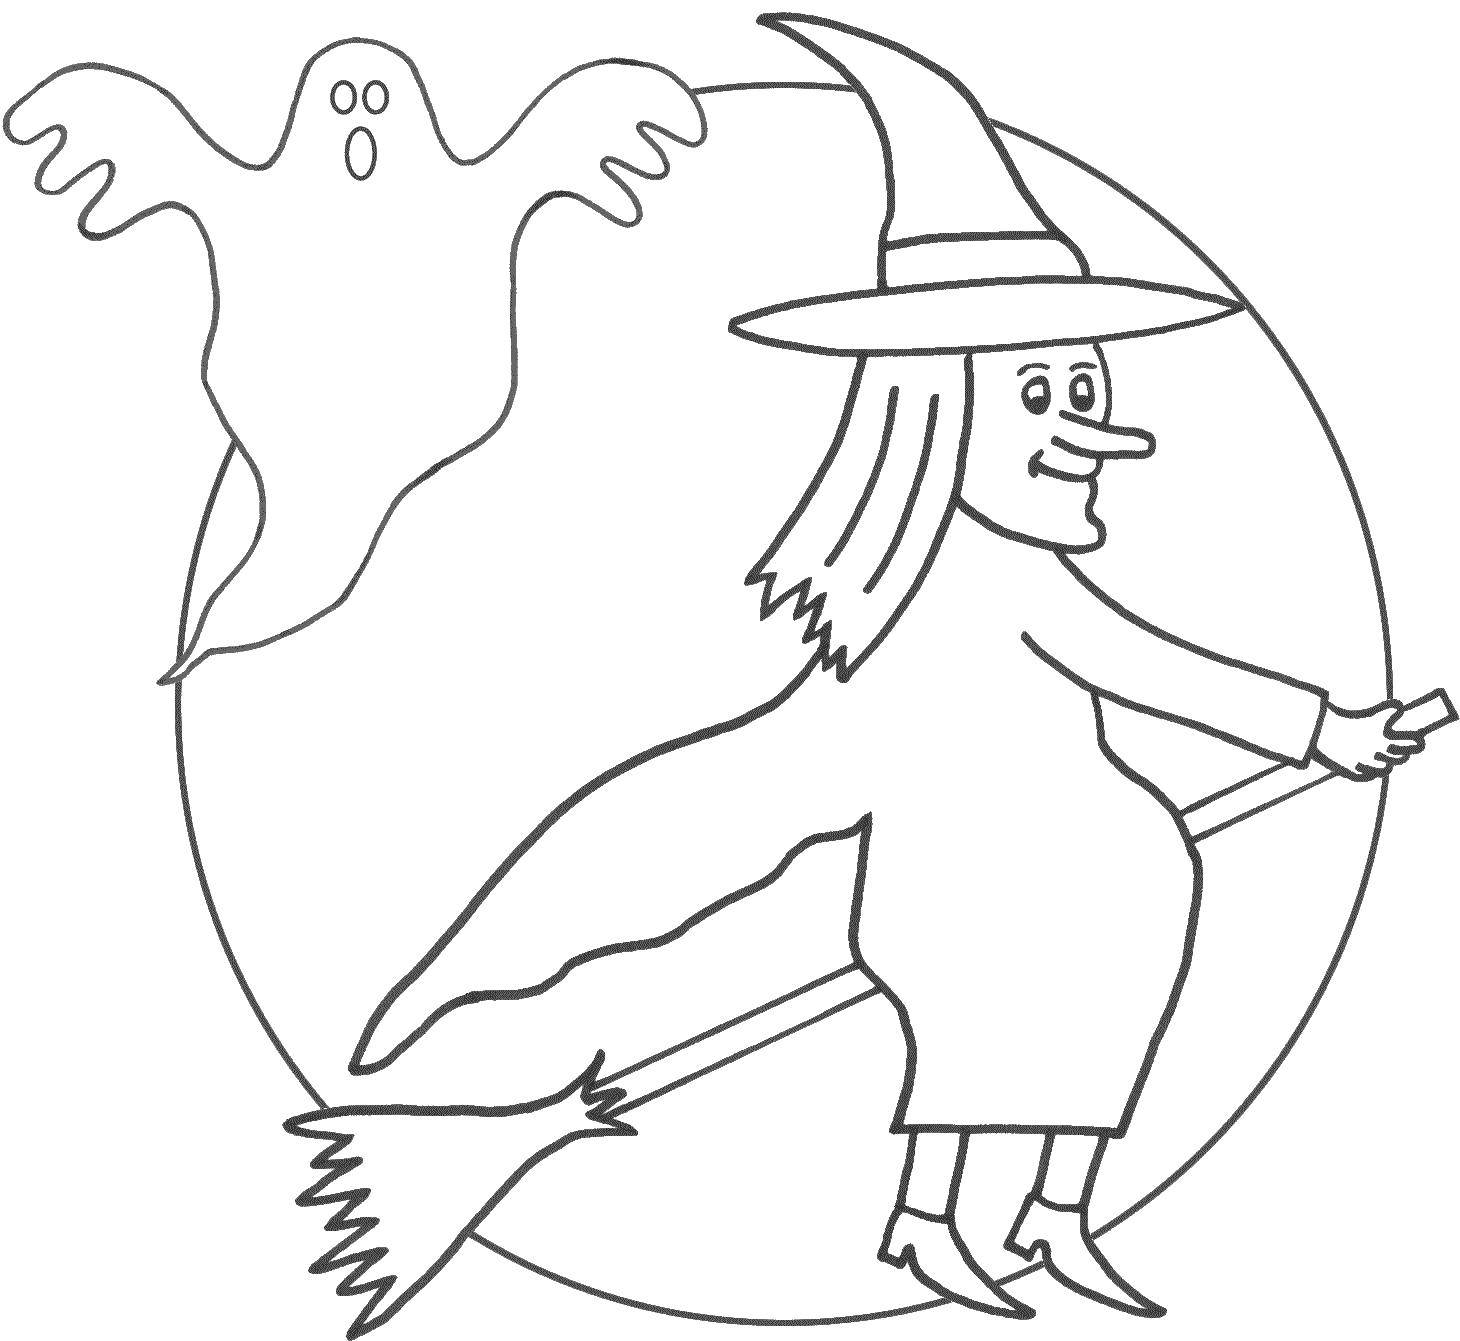 Coloring Witch flying on a broom. Category witch. Tags:  Halloween, Ghost, witch.